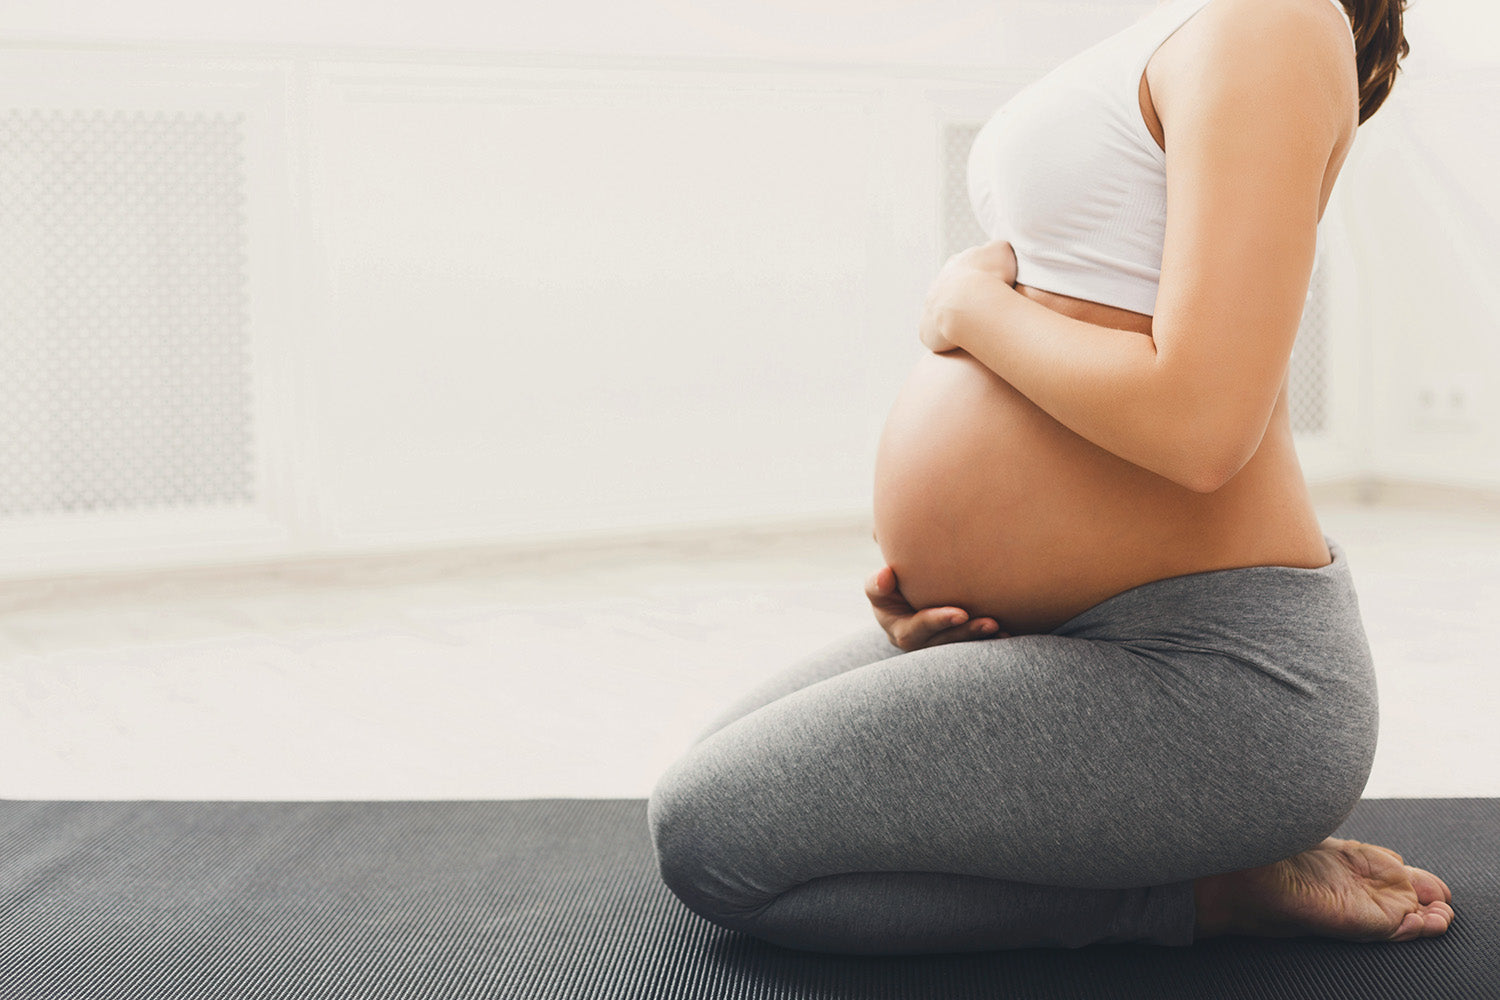 Yoga Positions to Improve Posture in Pregnancy